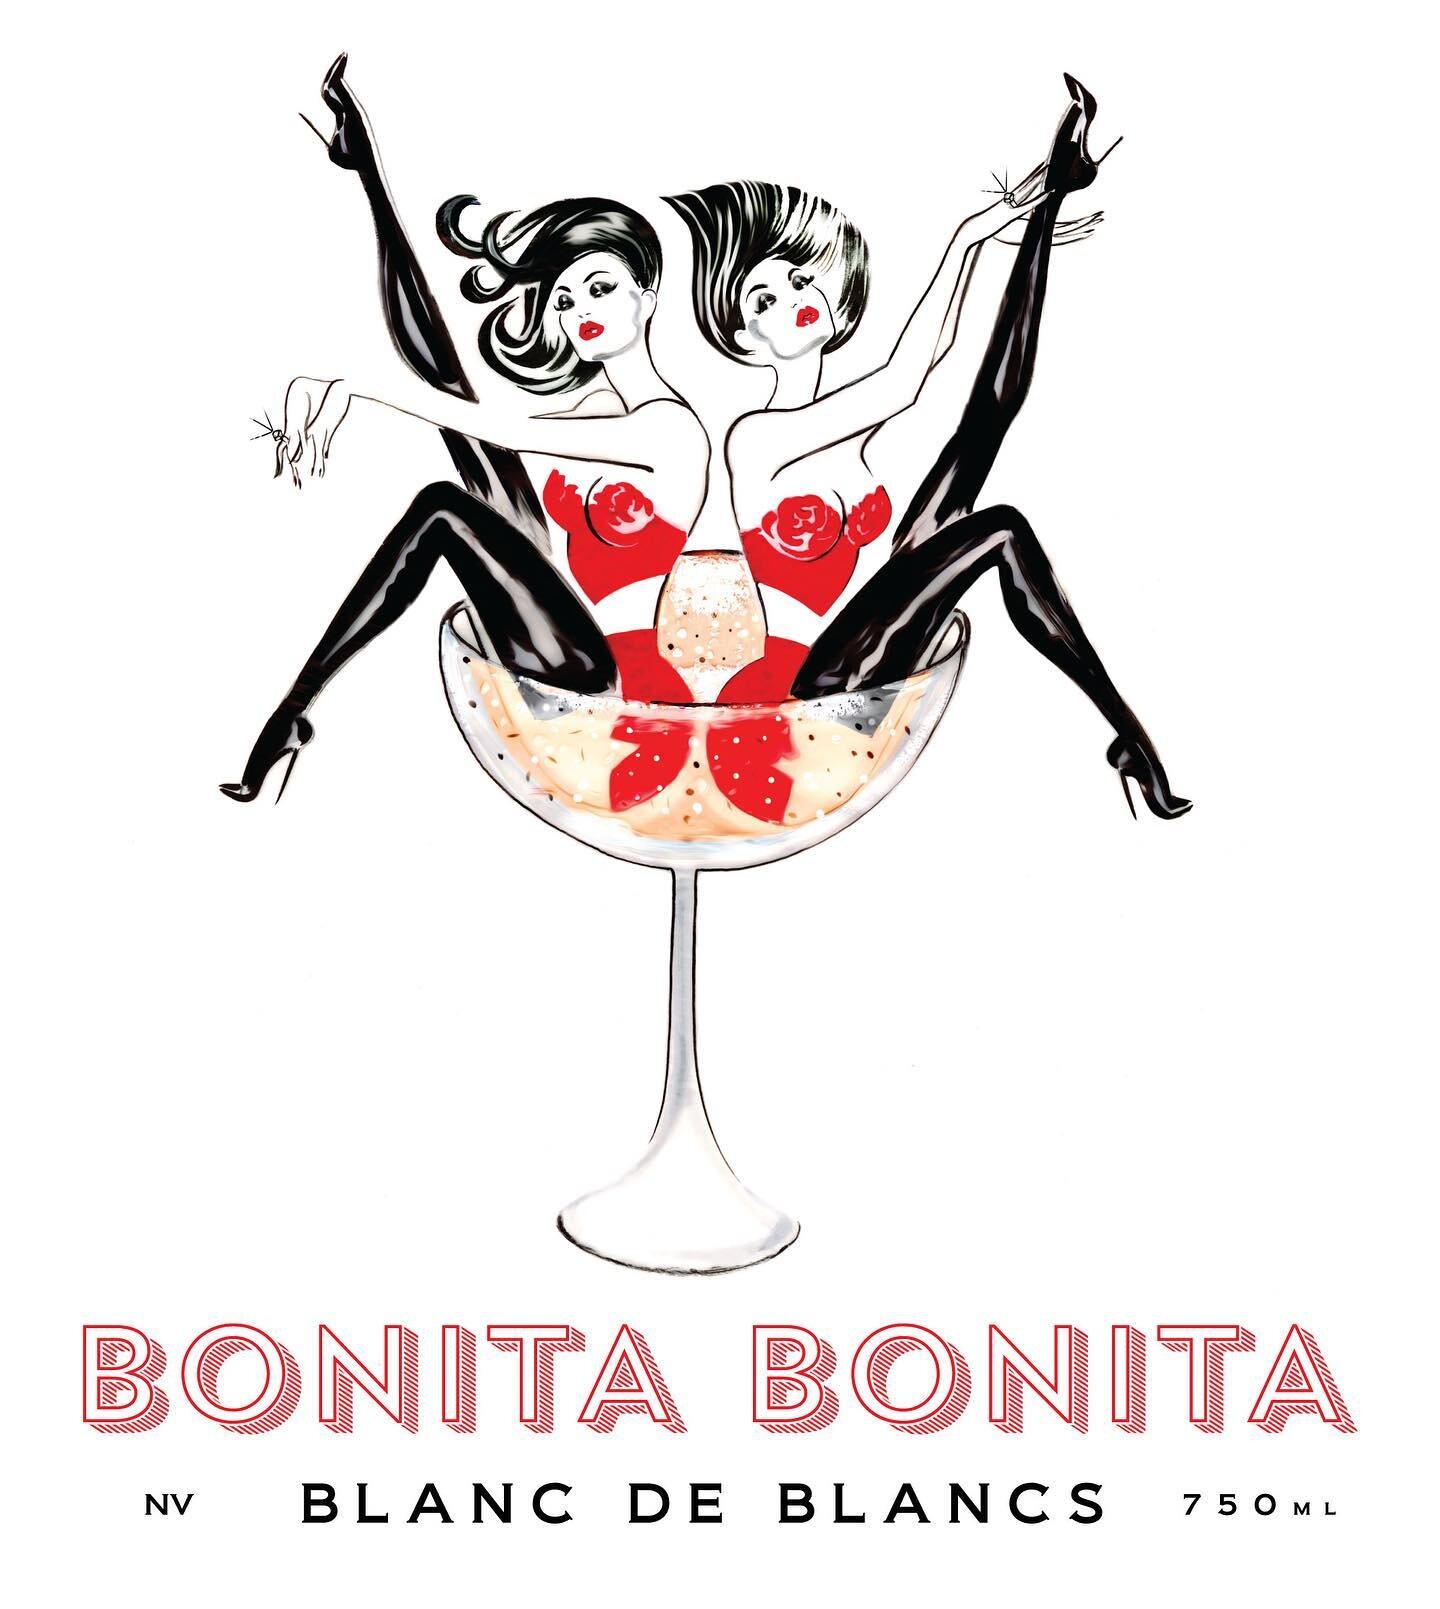 Please welcome to our Bonita Bonita family this fall our Bubbles &amp; Wifeys Blanc de Blancs! We wanted to create something for our Bonita Bonita Club Members that makes them feel apart of Nicole and Artem&rsquo;s marriage celebration! 👰🏽&zwj;♀️💒